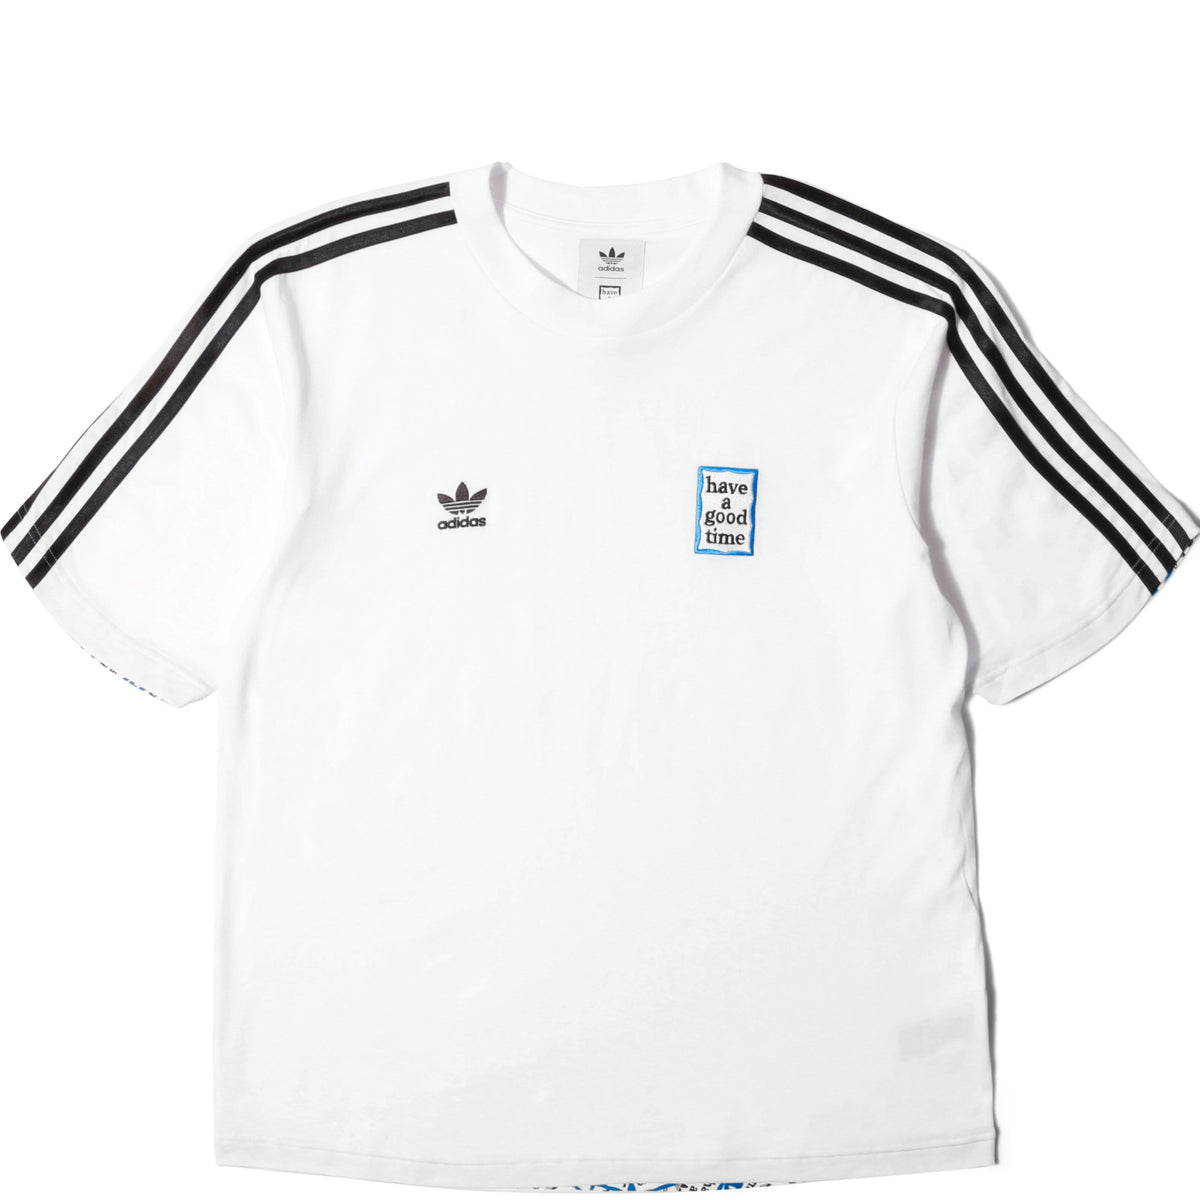 adidas have a good time t shirt